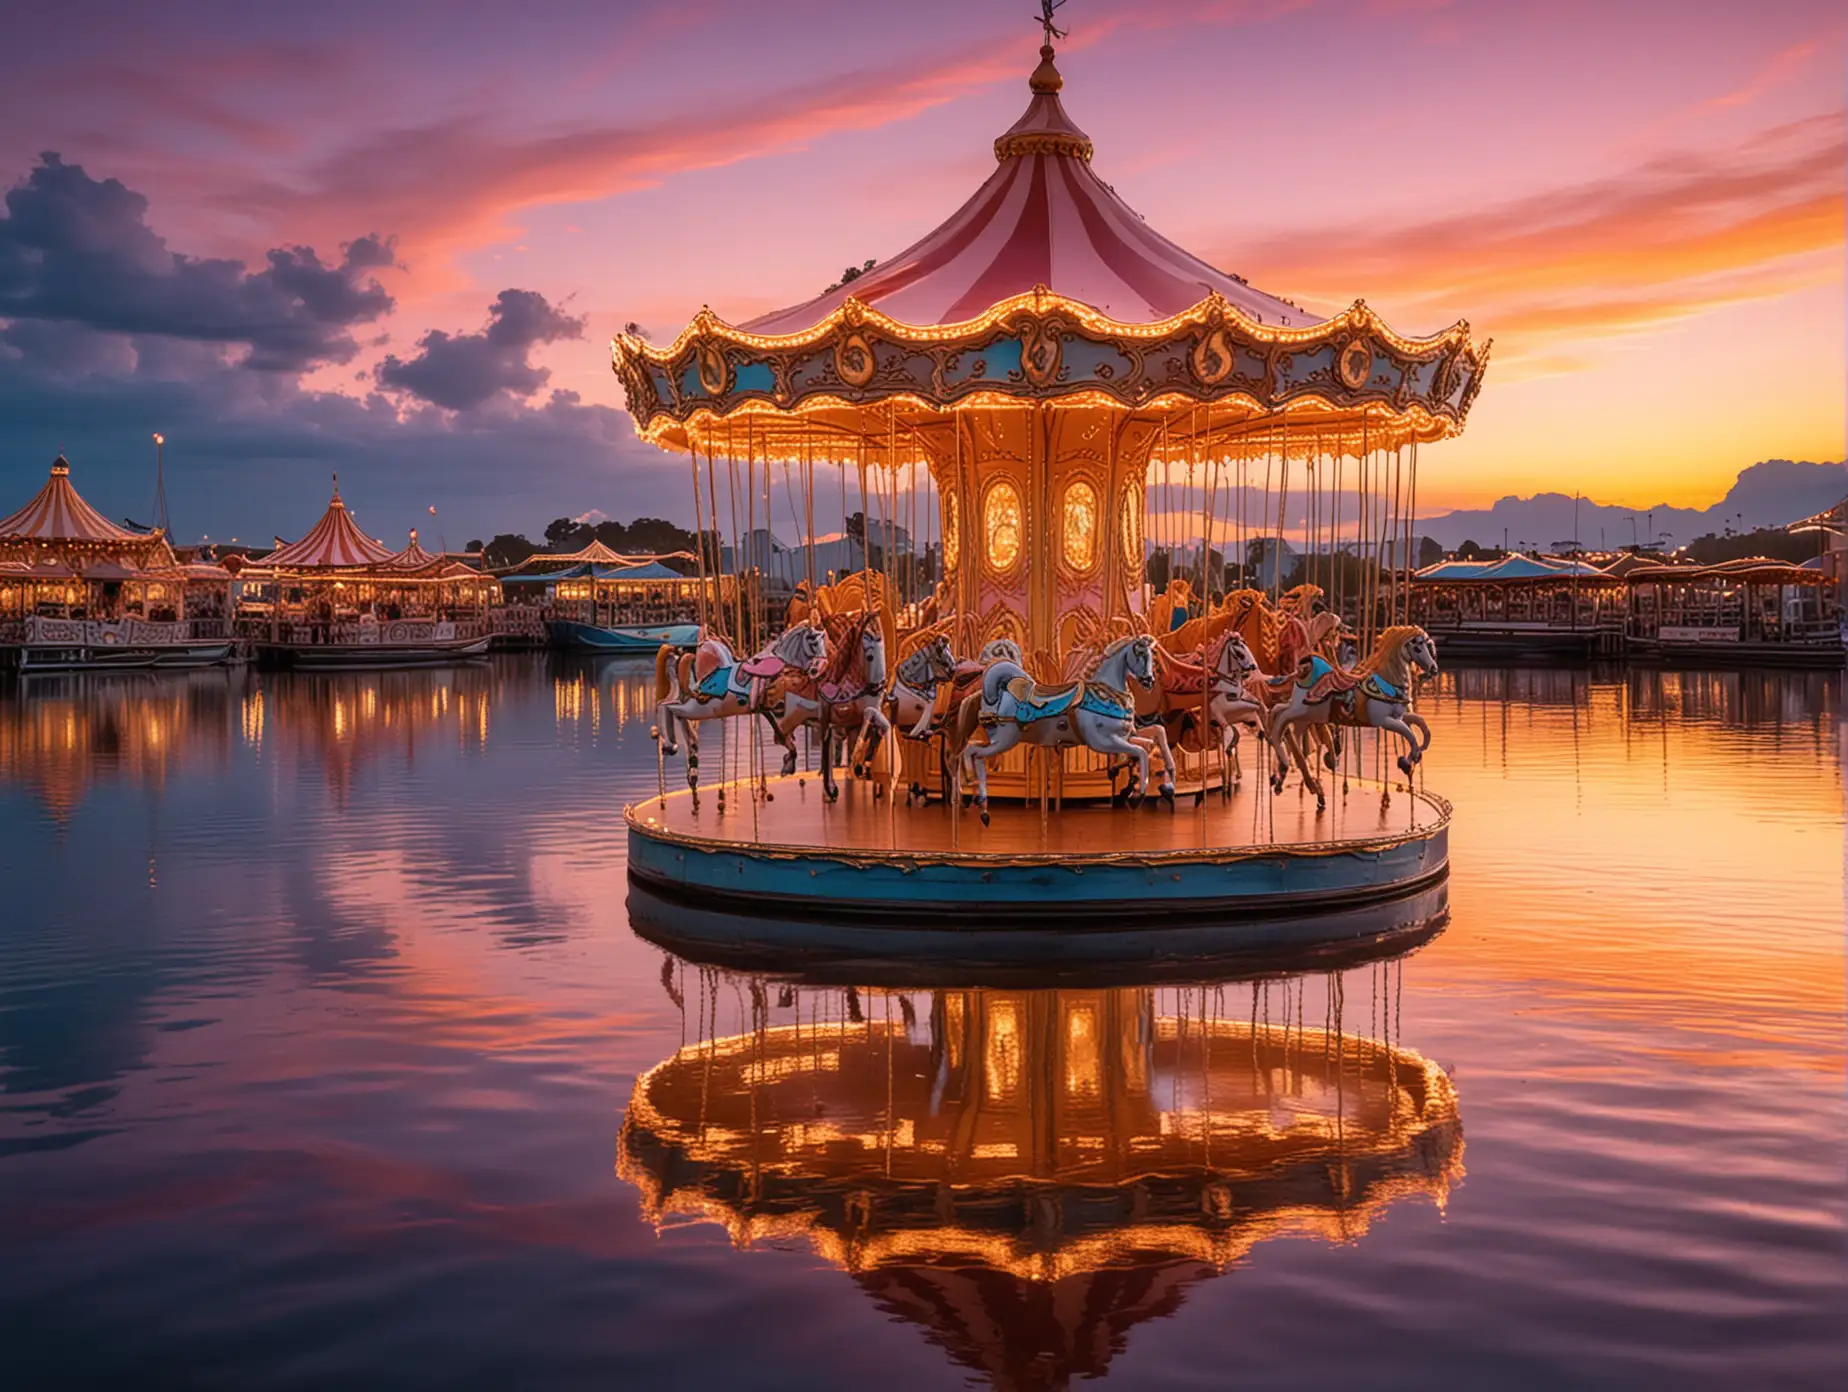 A carousel illuminated with golden lights, reflecting on the water surface beneath it, set against a backdrop of a breathtaking sunset with hues of orange, pink, and blue in the sky::5